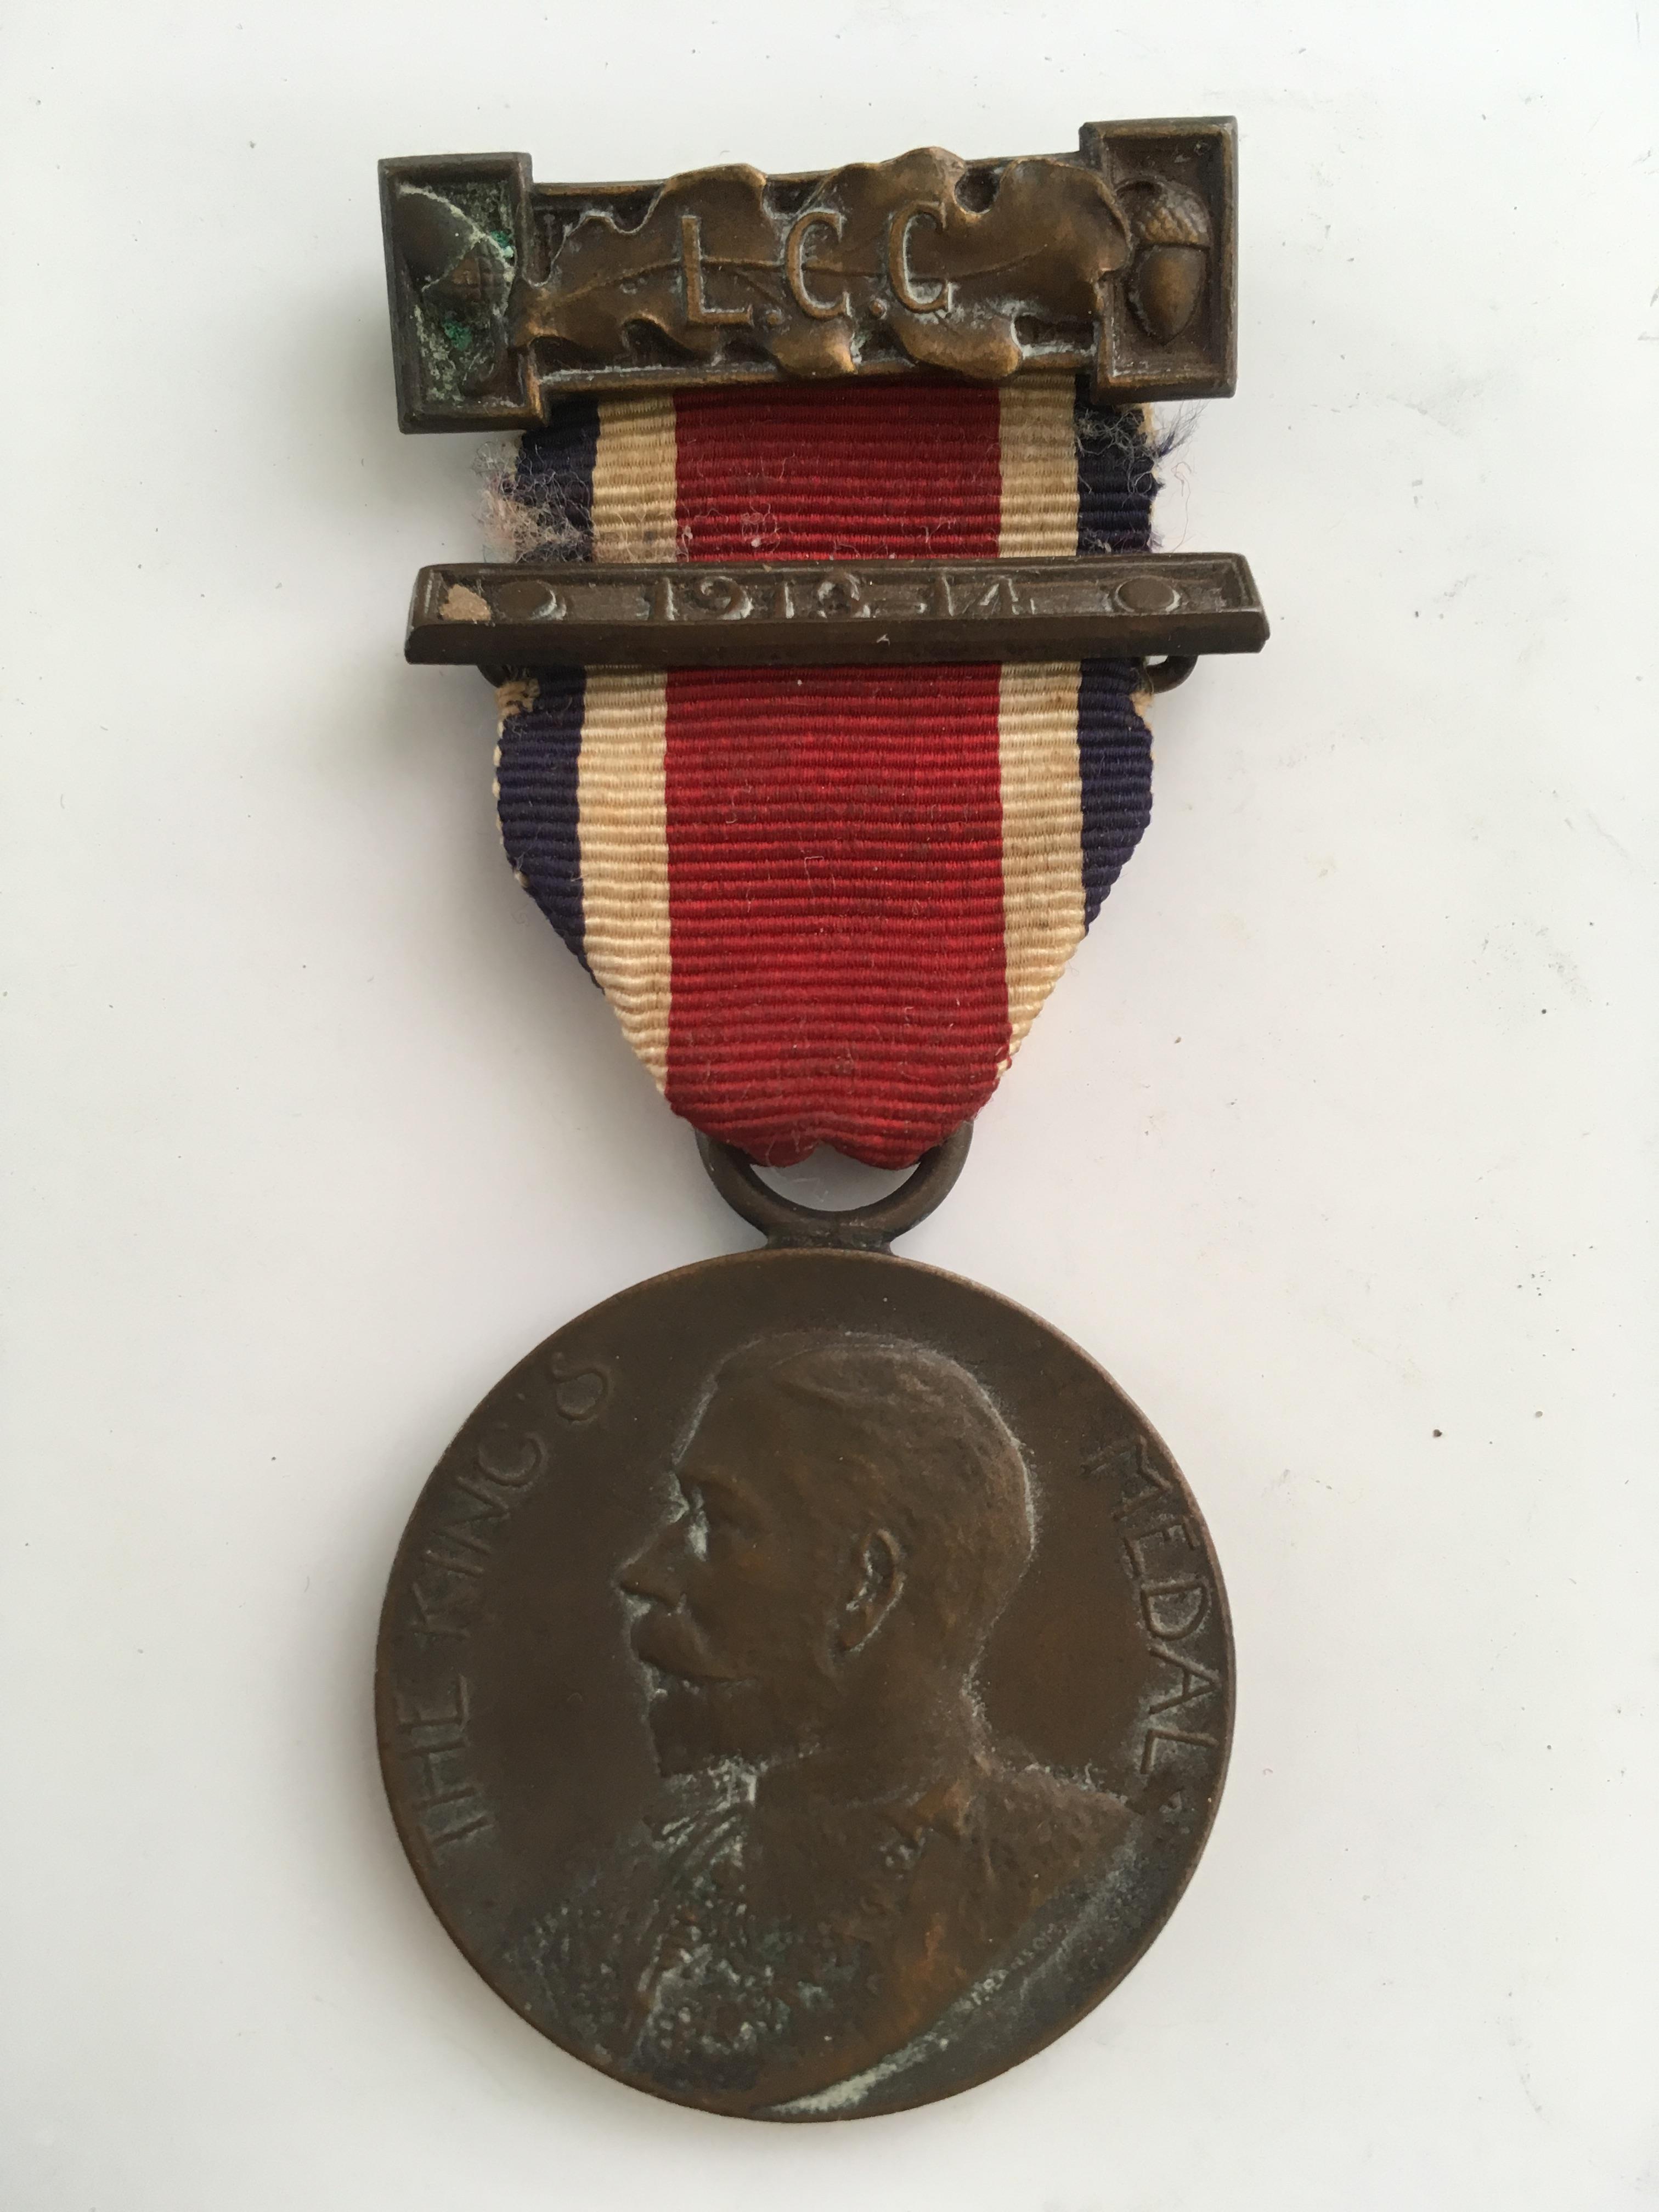 MEDALS: LONDON COUNTY COUNCIL 1913-14 KINGS MEDAL NAMED TO L. - Image 3 of 6